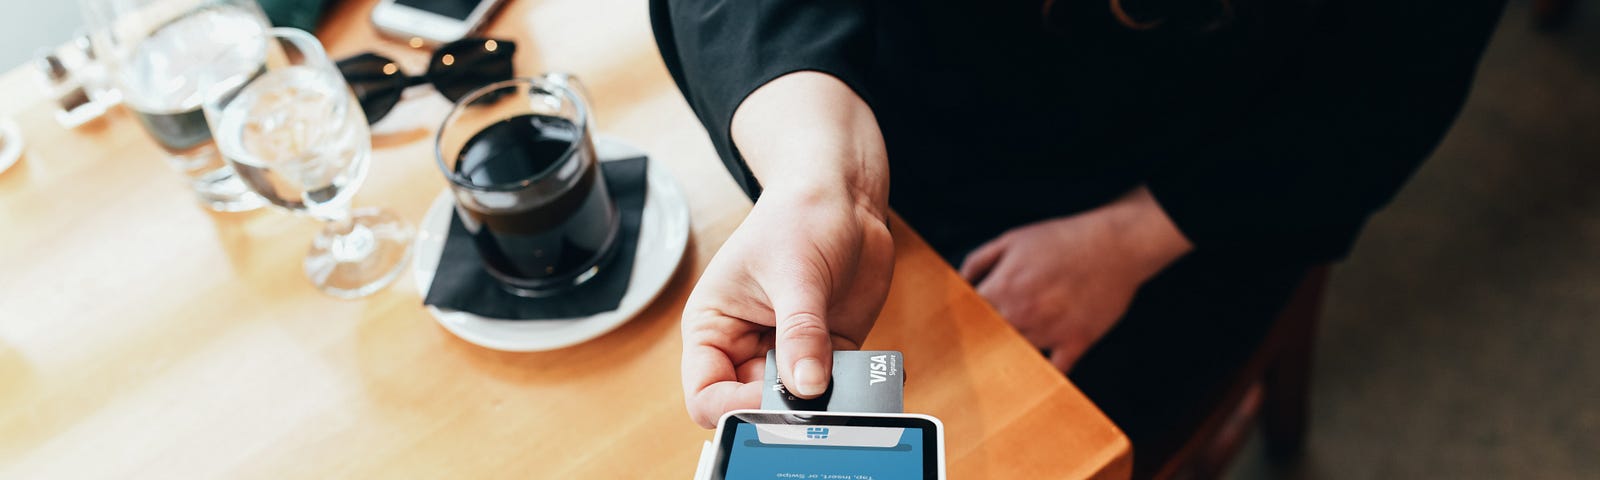 Customer using mobile payment tech in a coffee shop.